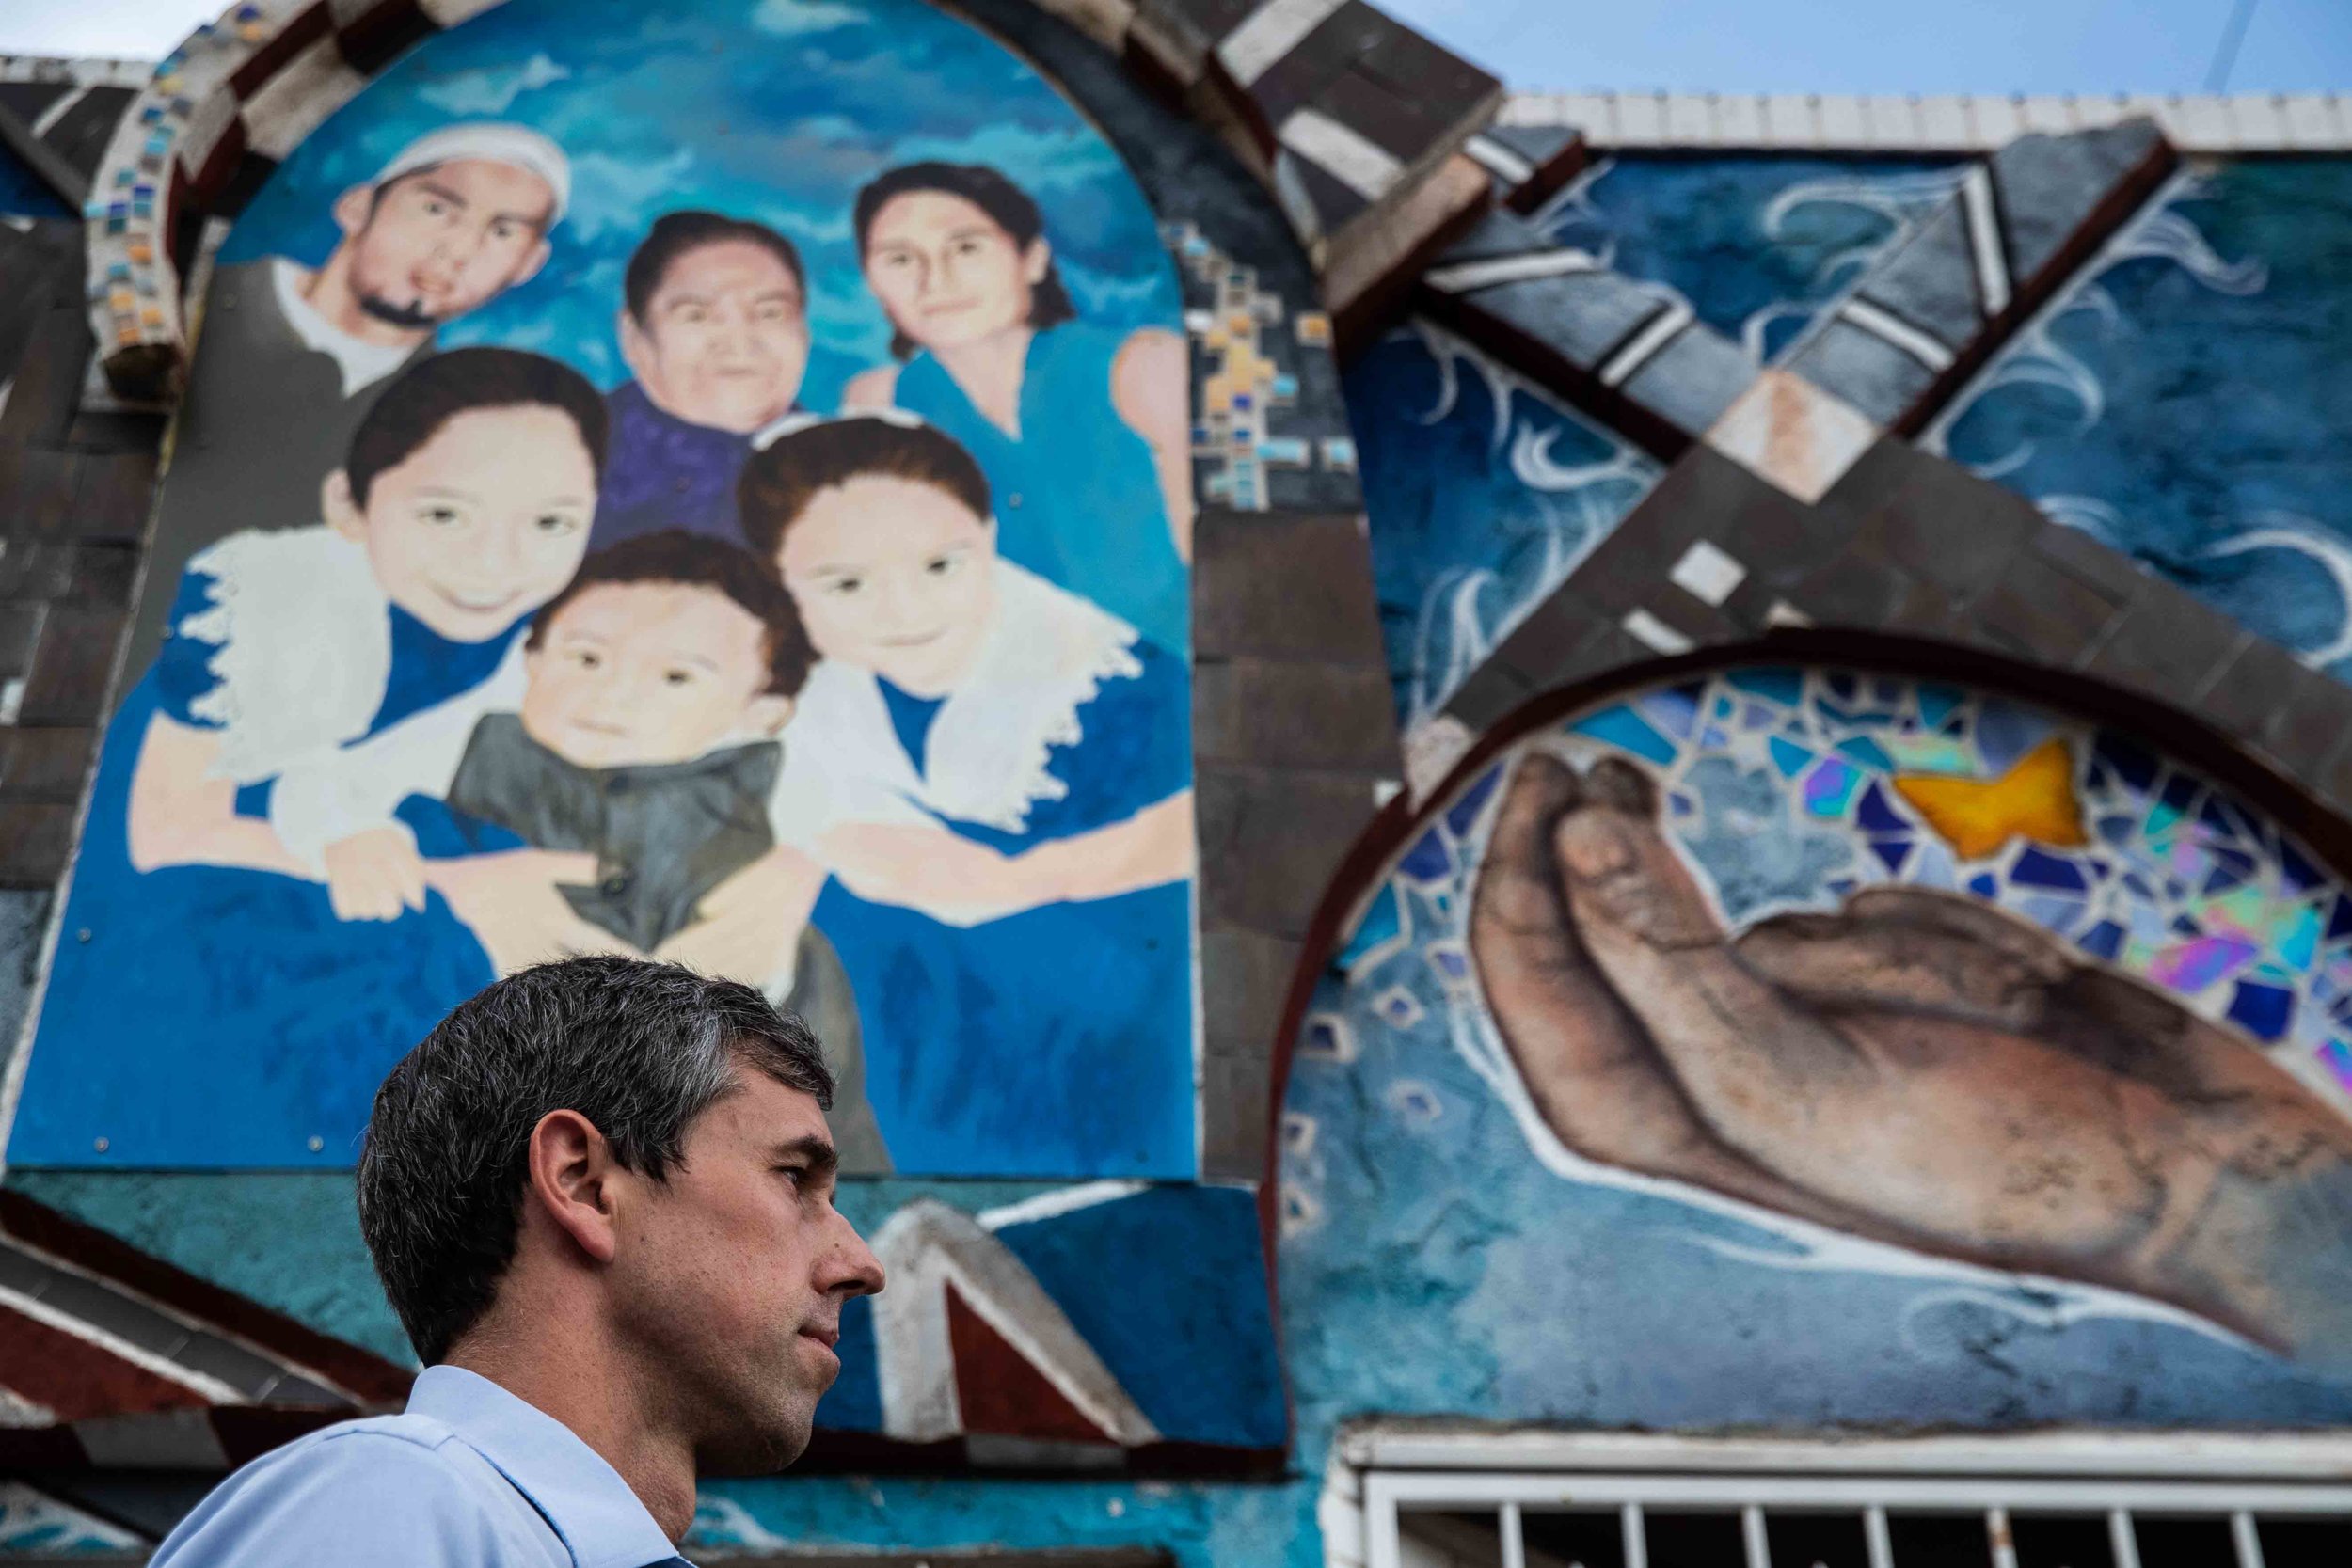  Democratic presidential candidate Beto O'Rourke walks in front of a mural at Yandell Dr. during a silent march in honor to the victims of a mass shooting occurred in Walmart on Satuday morning in El Paso on Sunday, August 4, 2019. 